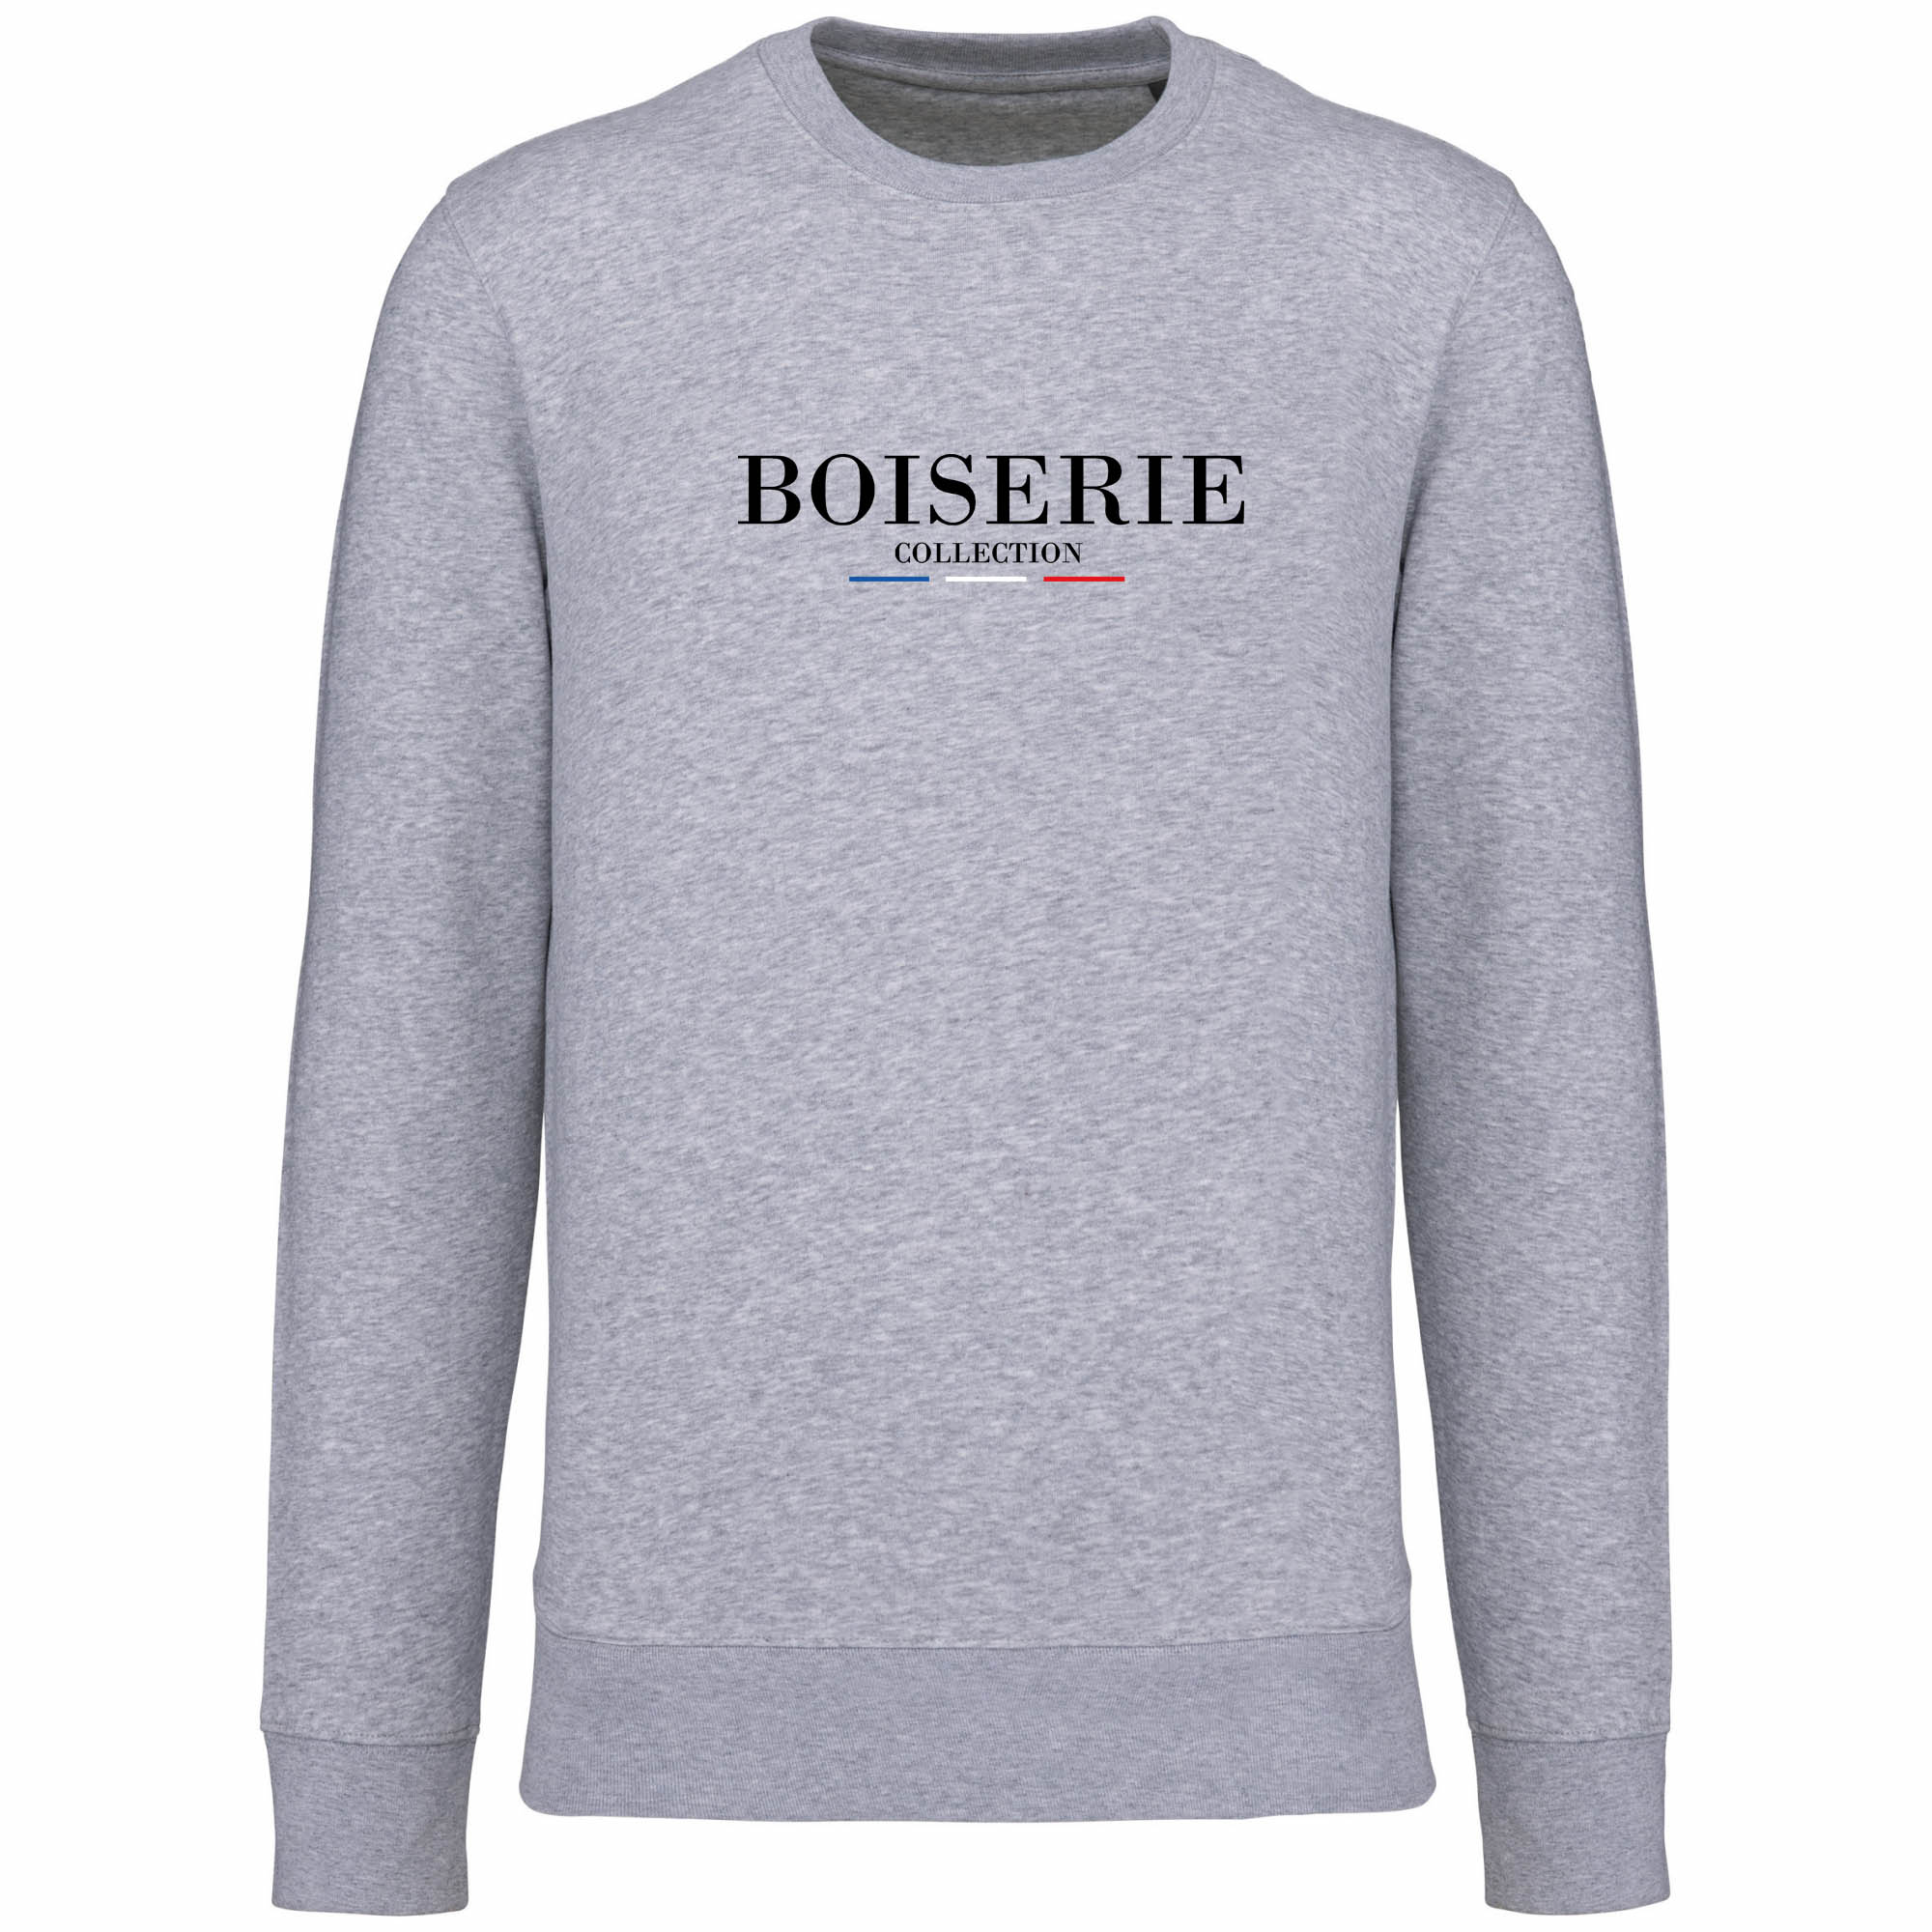 LE PULL BOISERIE COLLECTION GRIS CHINE